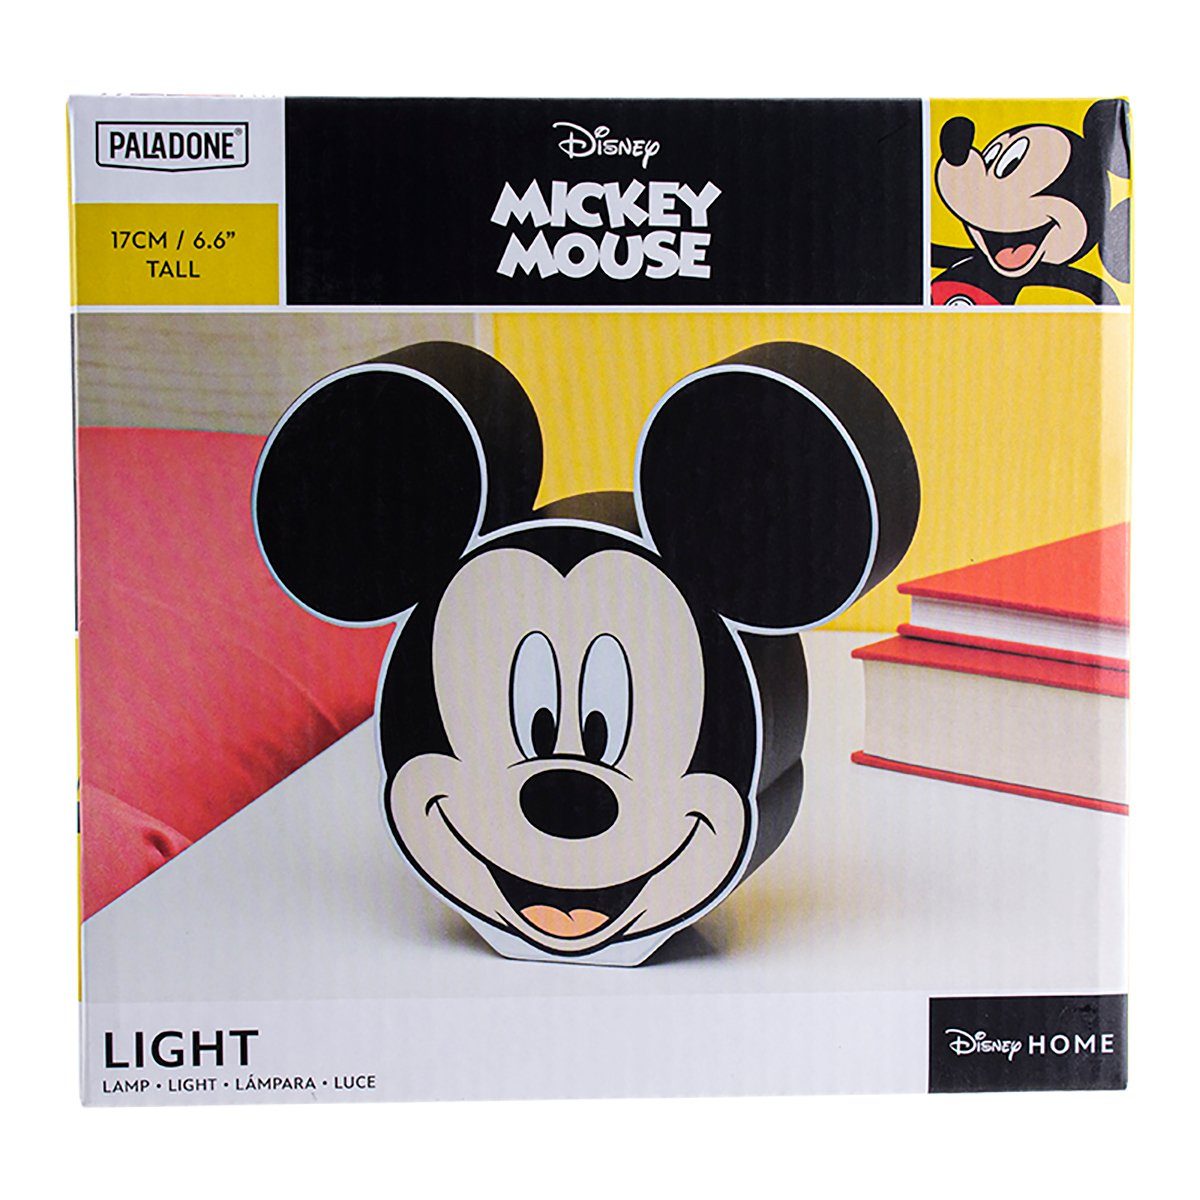 Mouse Leuchte Paladone Stehlampe Disney Mickey